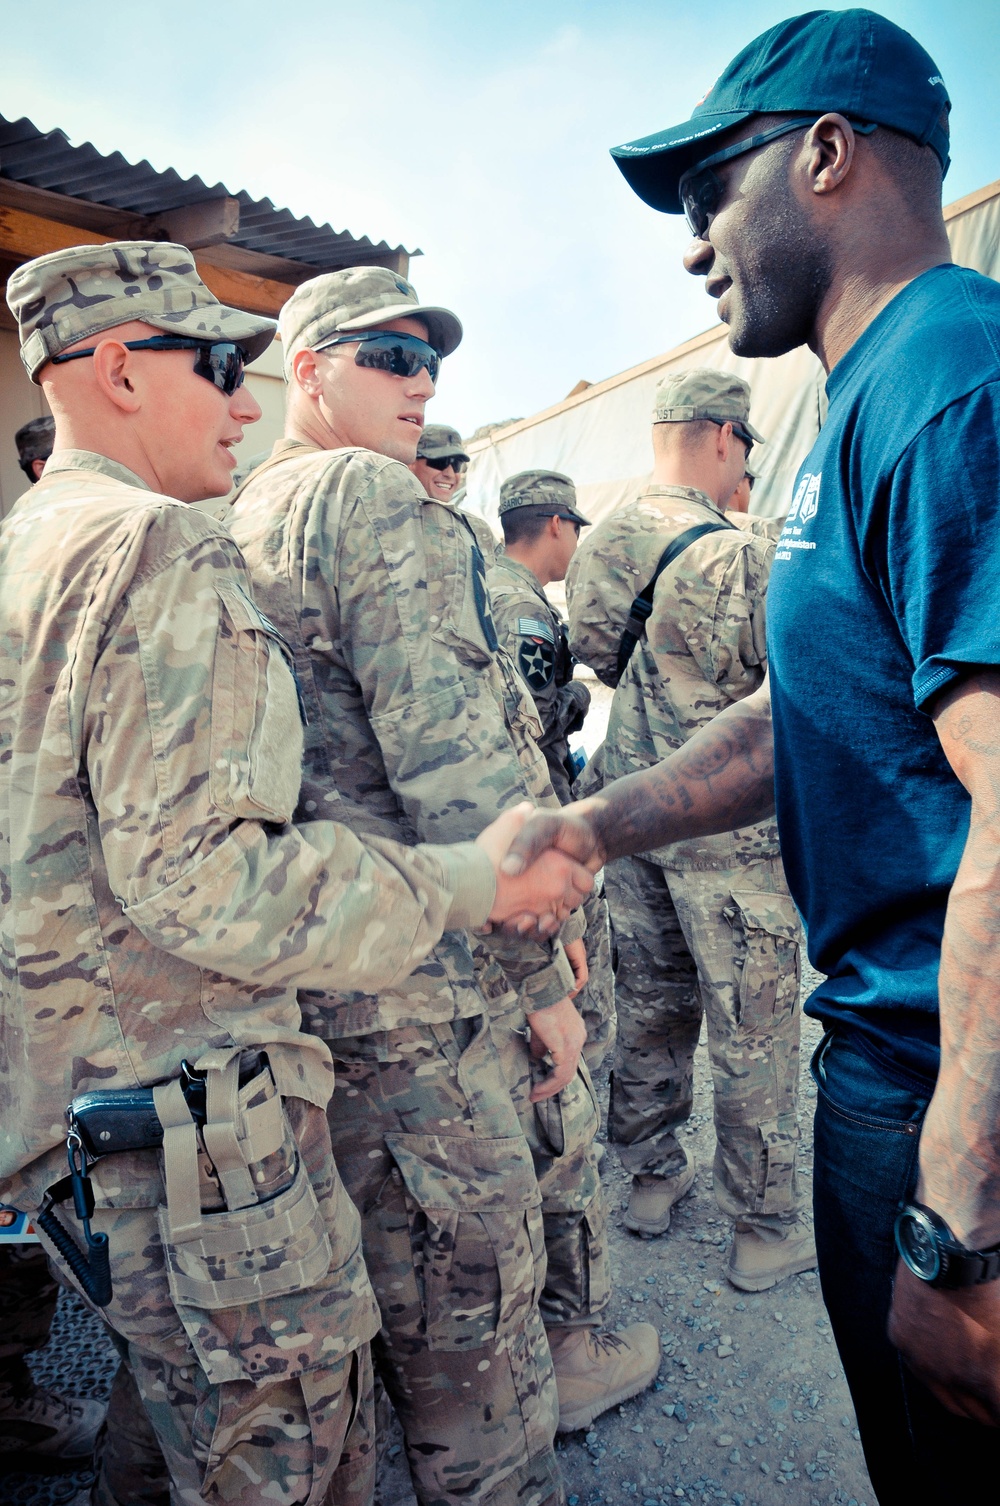 NFL players visit soldiers of Masum Ghar